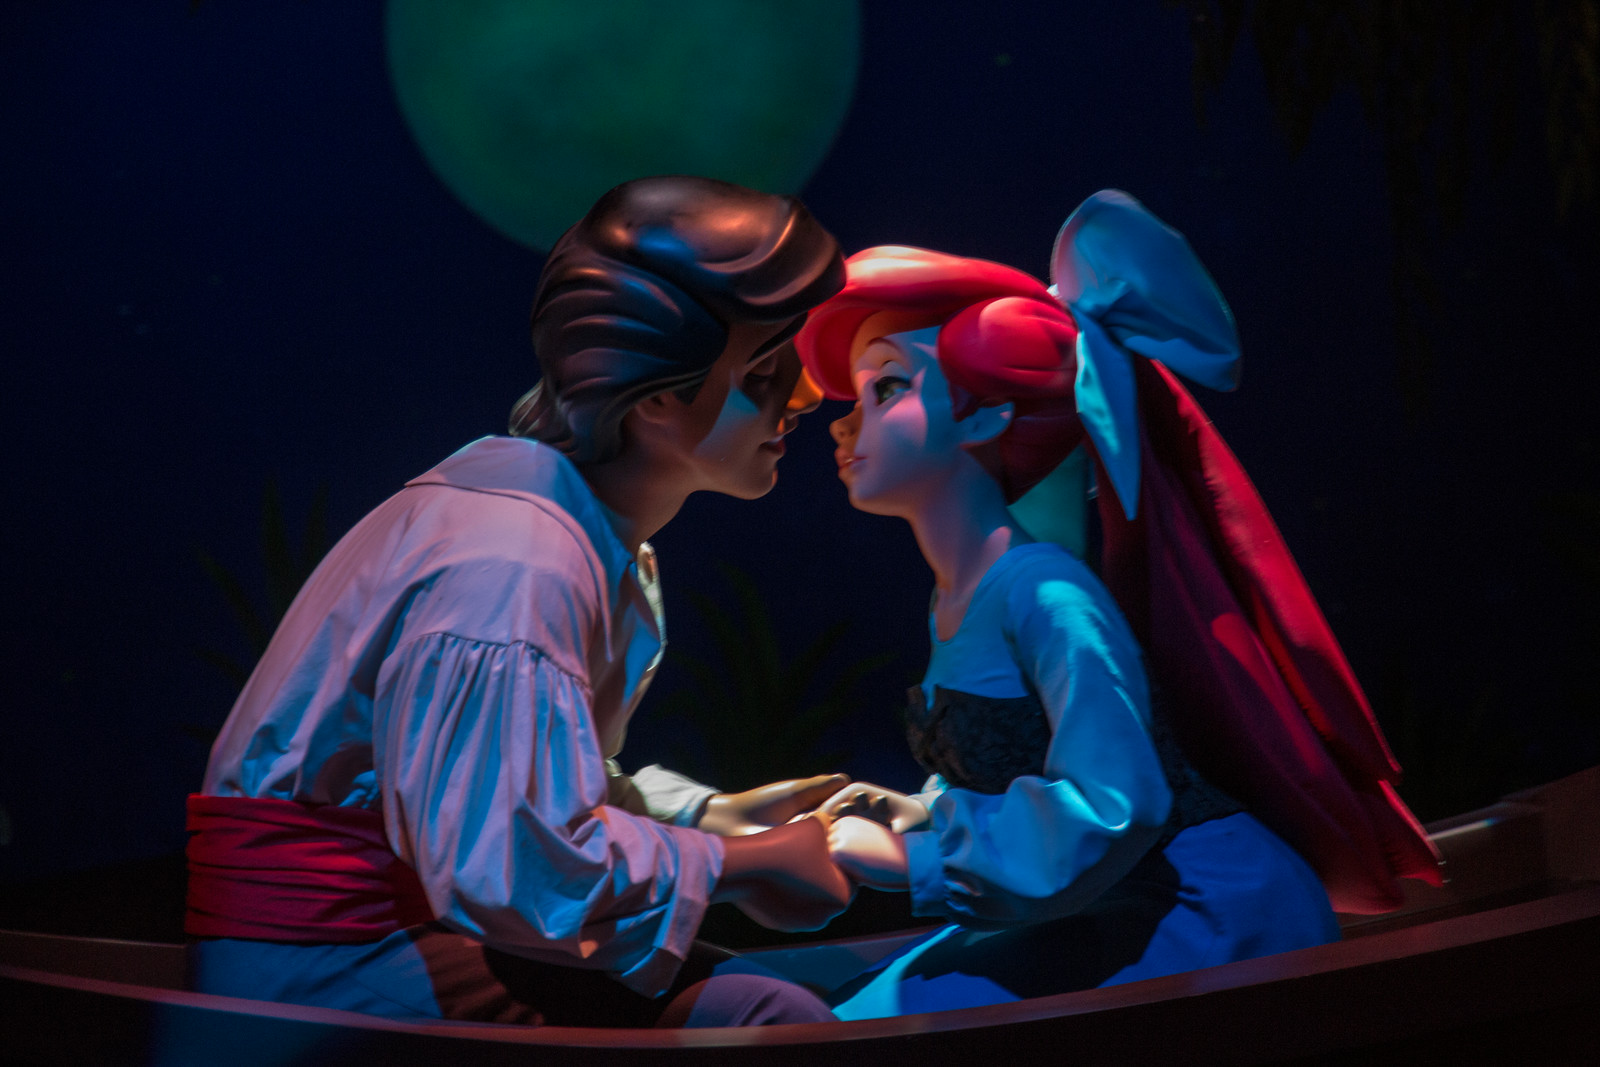 New Fantasyland - Under the Sea: Journey of the Little Mermaid